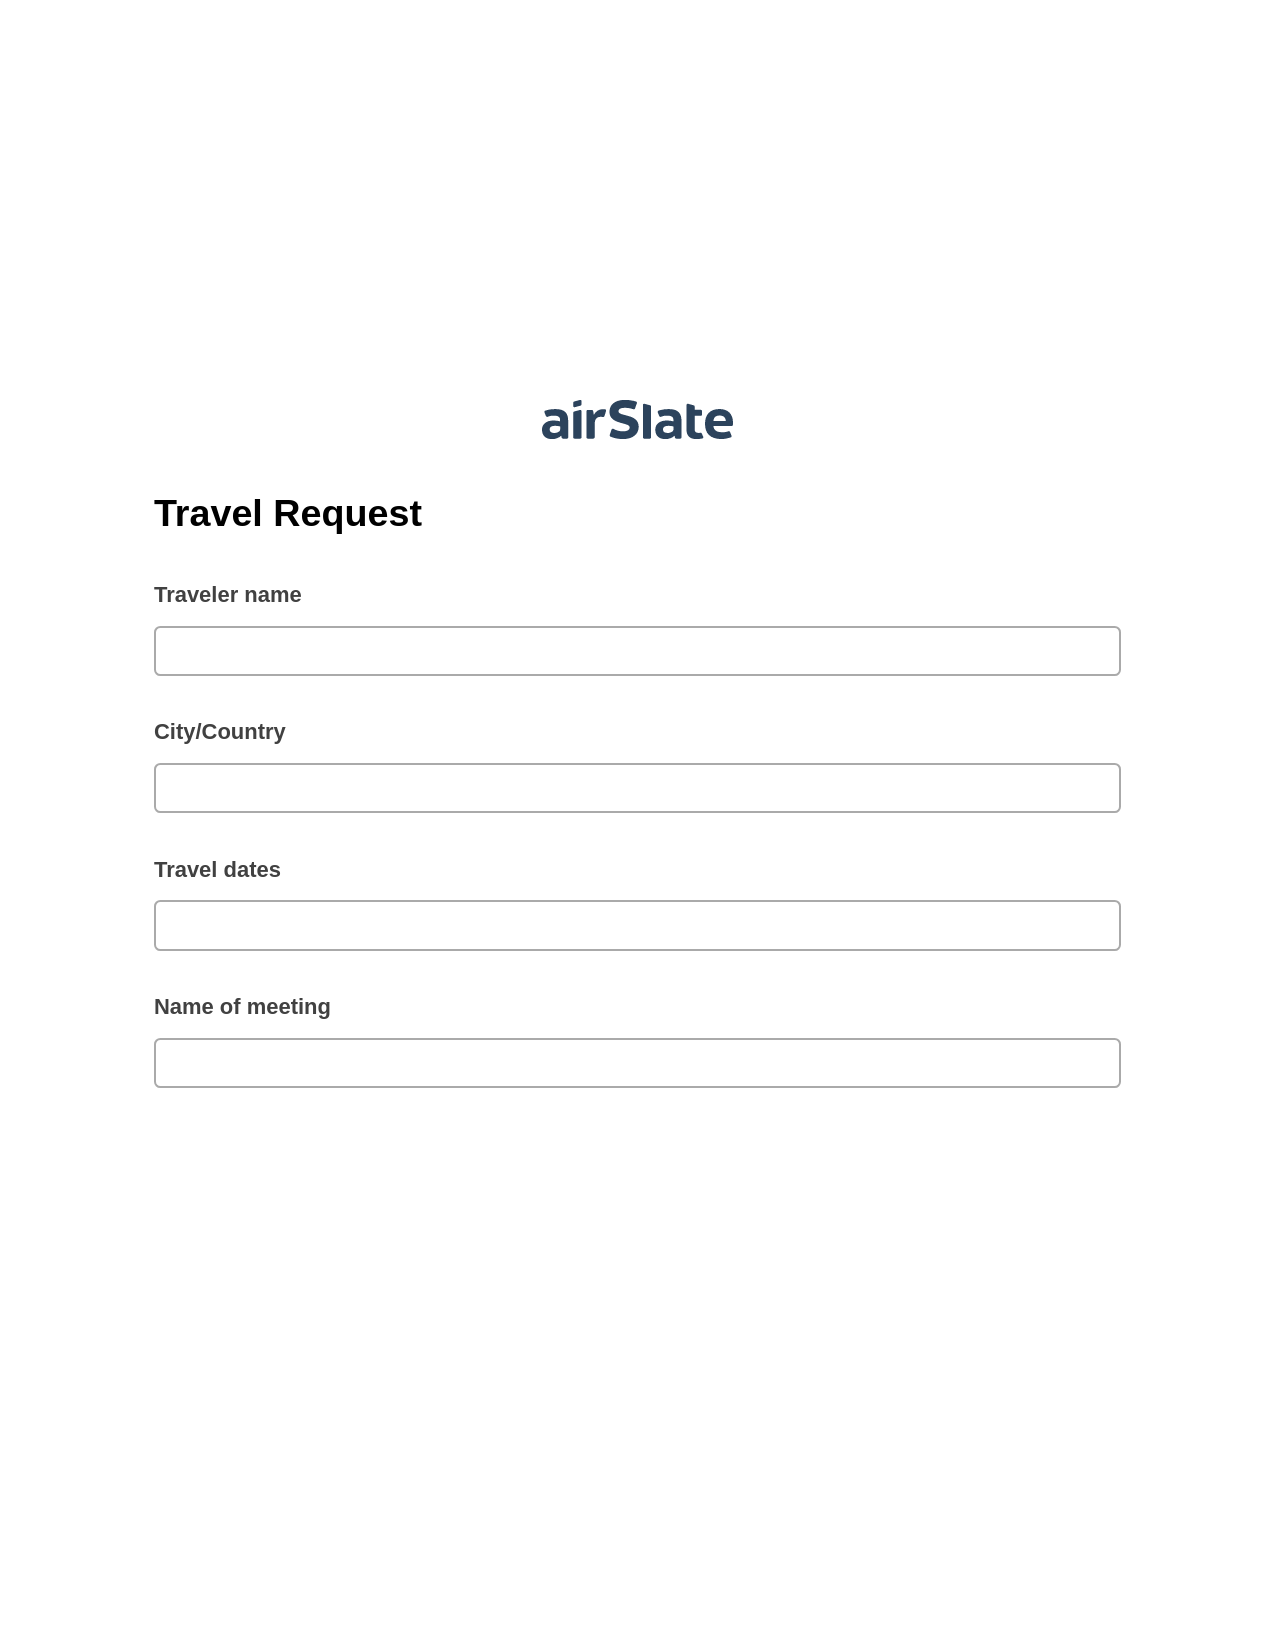 Travel Request Pre-fill from CSV File Bot, Create slate addon, Google Drive Bot